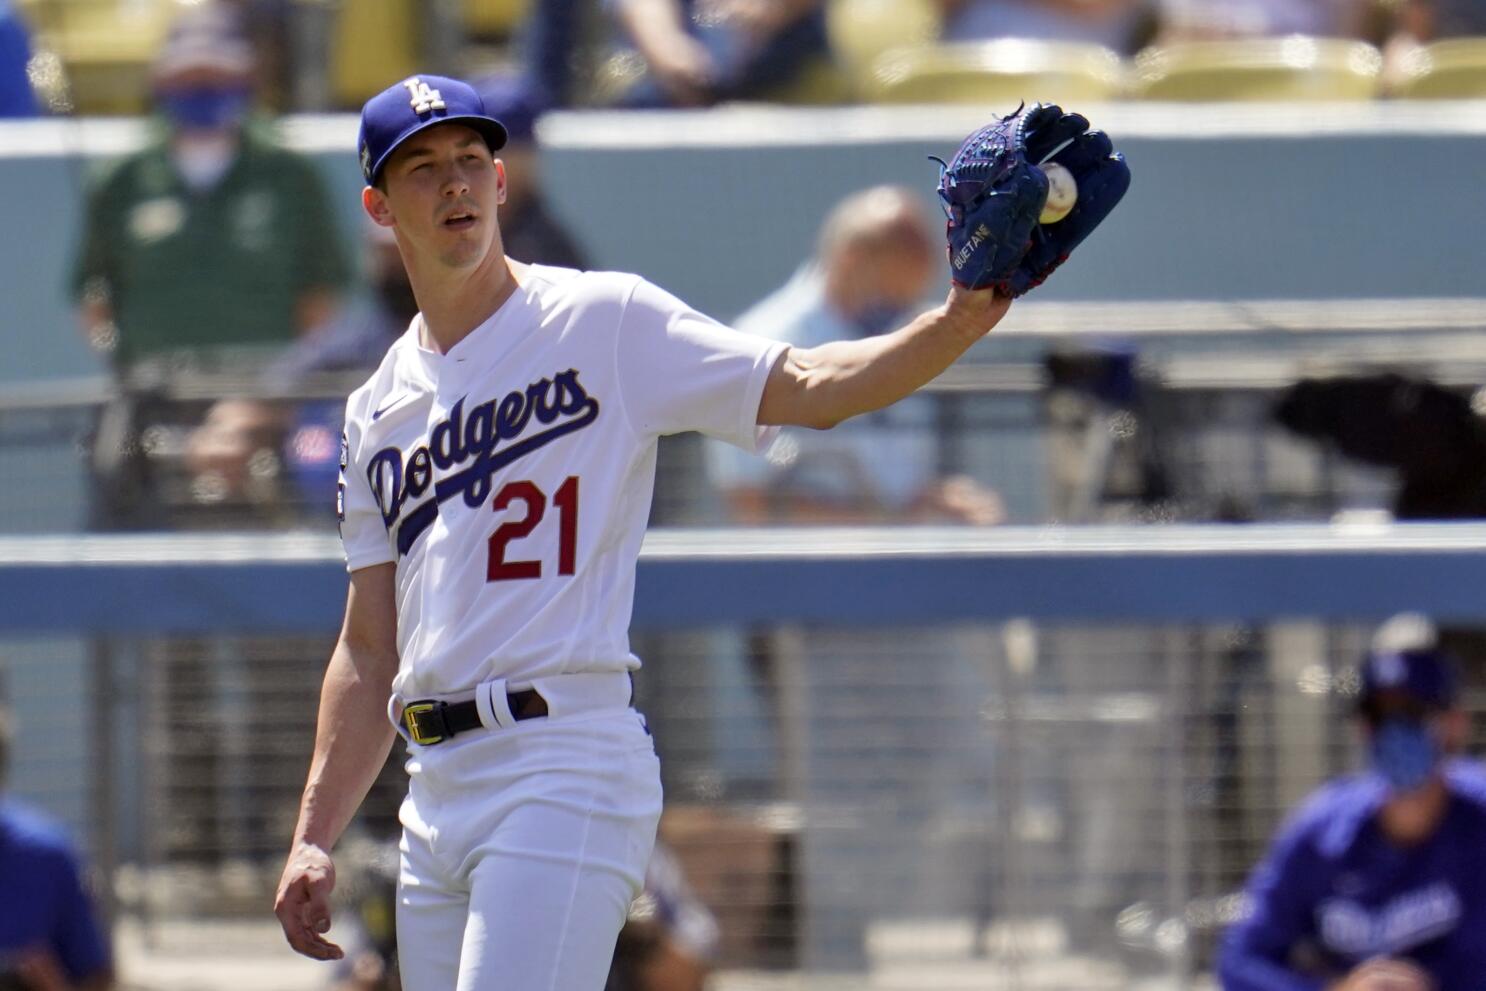 Dodgers vs. Padres preview: Alex Wood tries for 3-game LA win